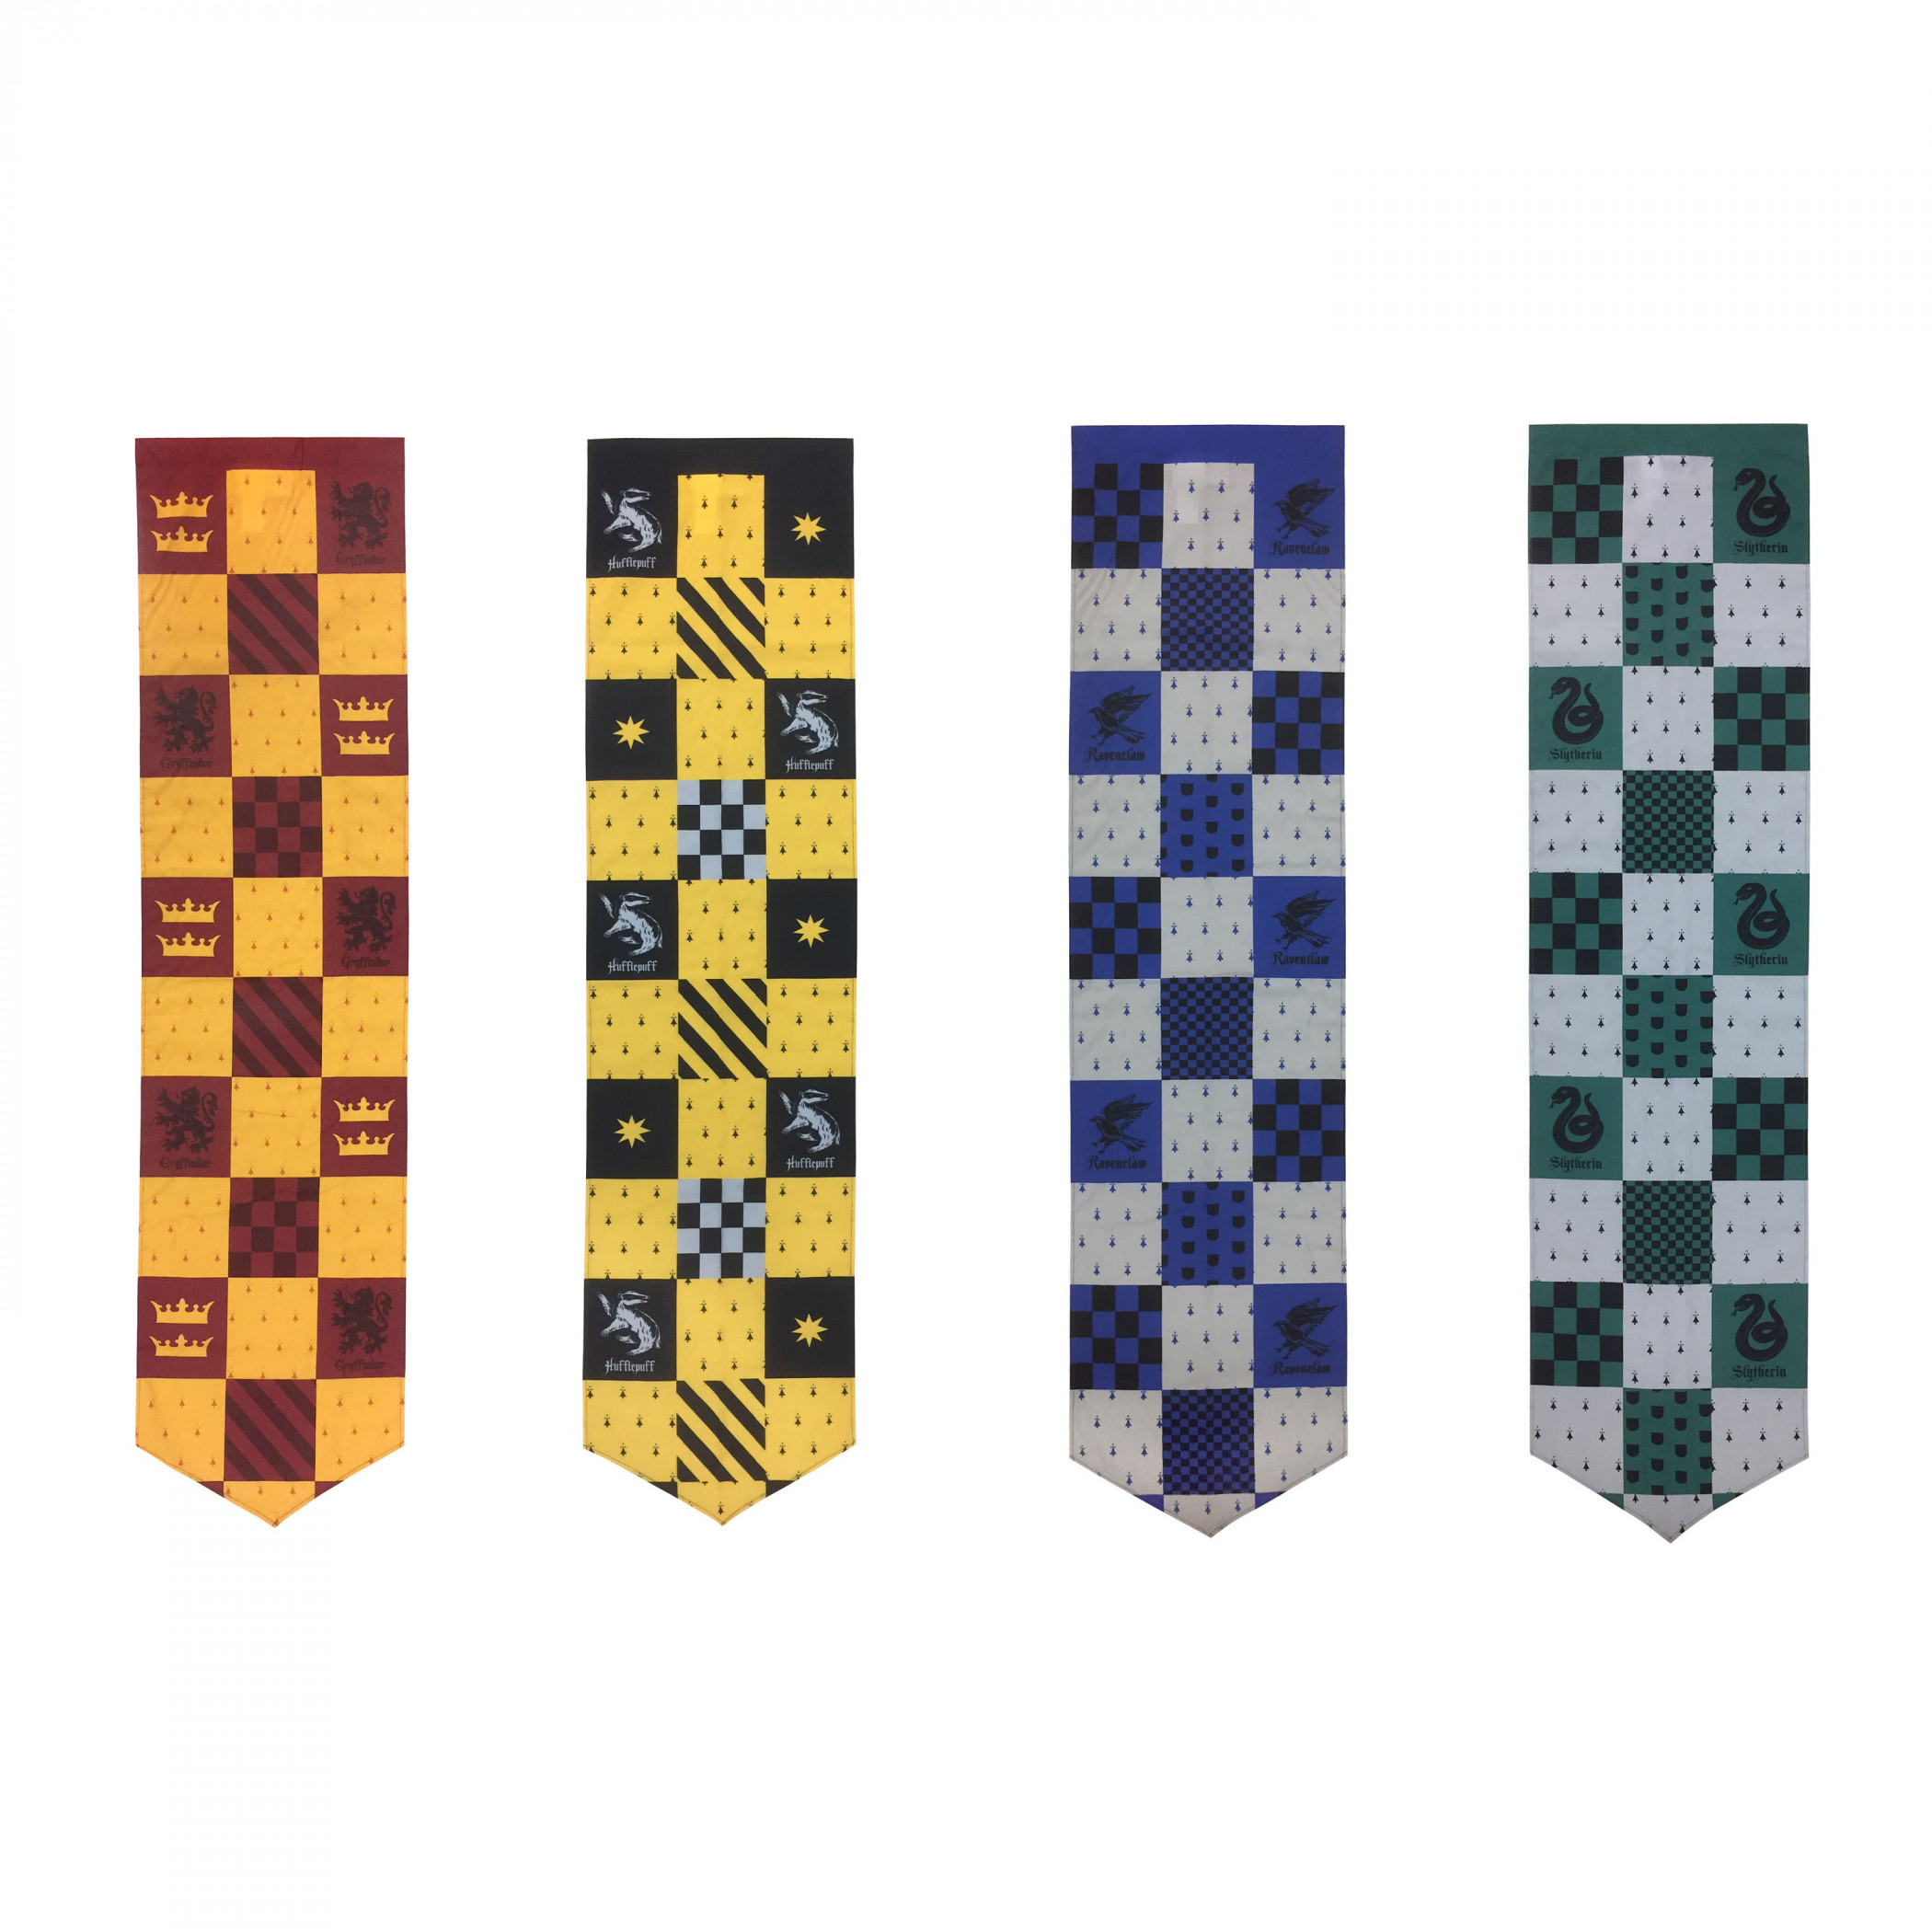 Harry Potter Hogwarts Banners Bedding Canopy 4-Pack